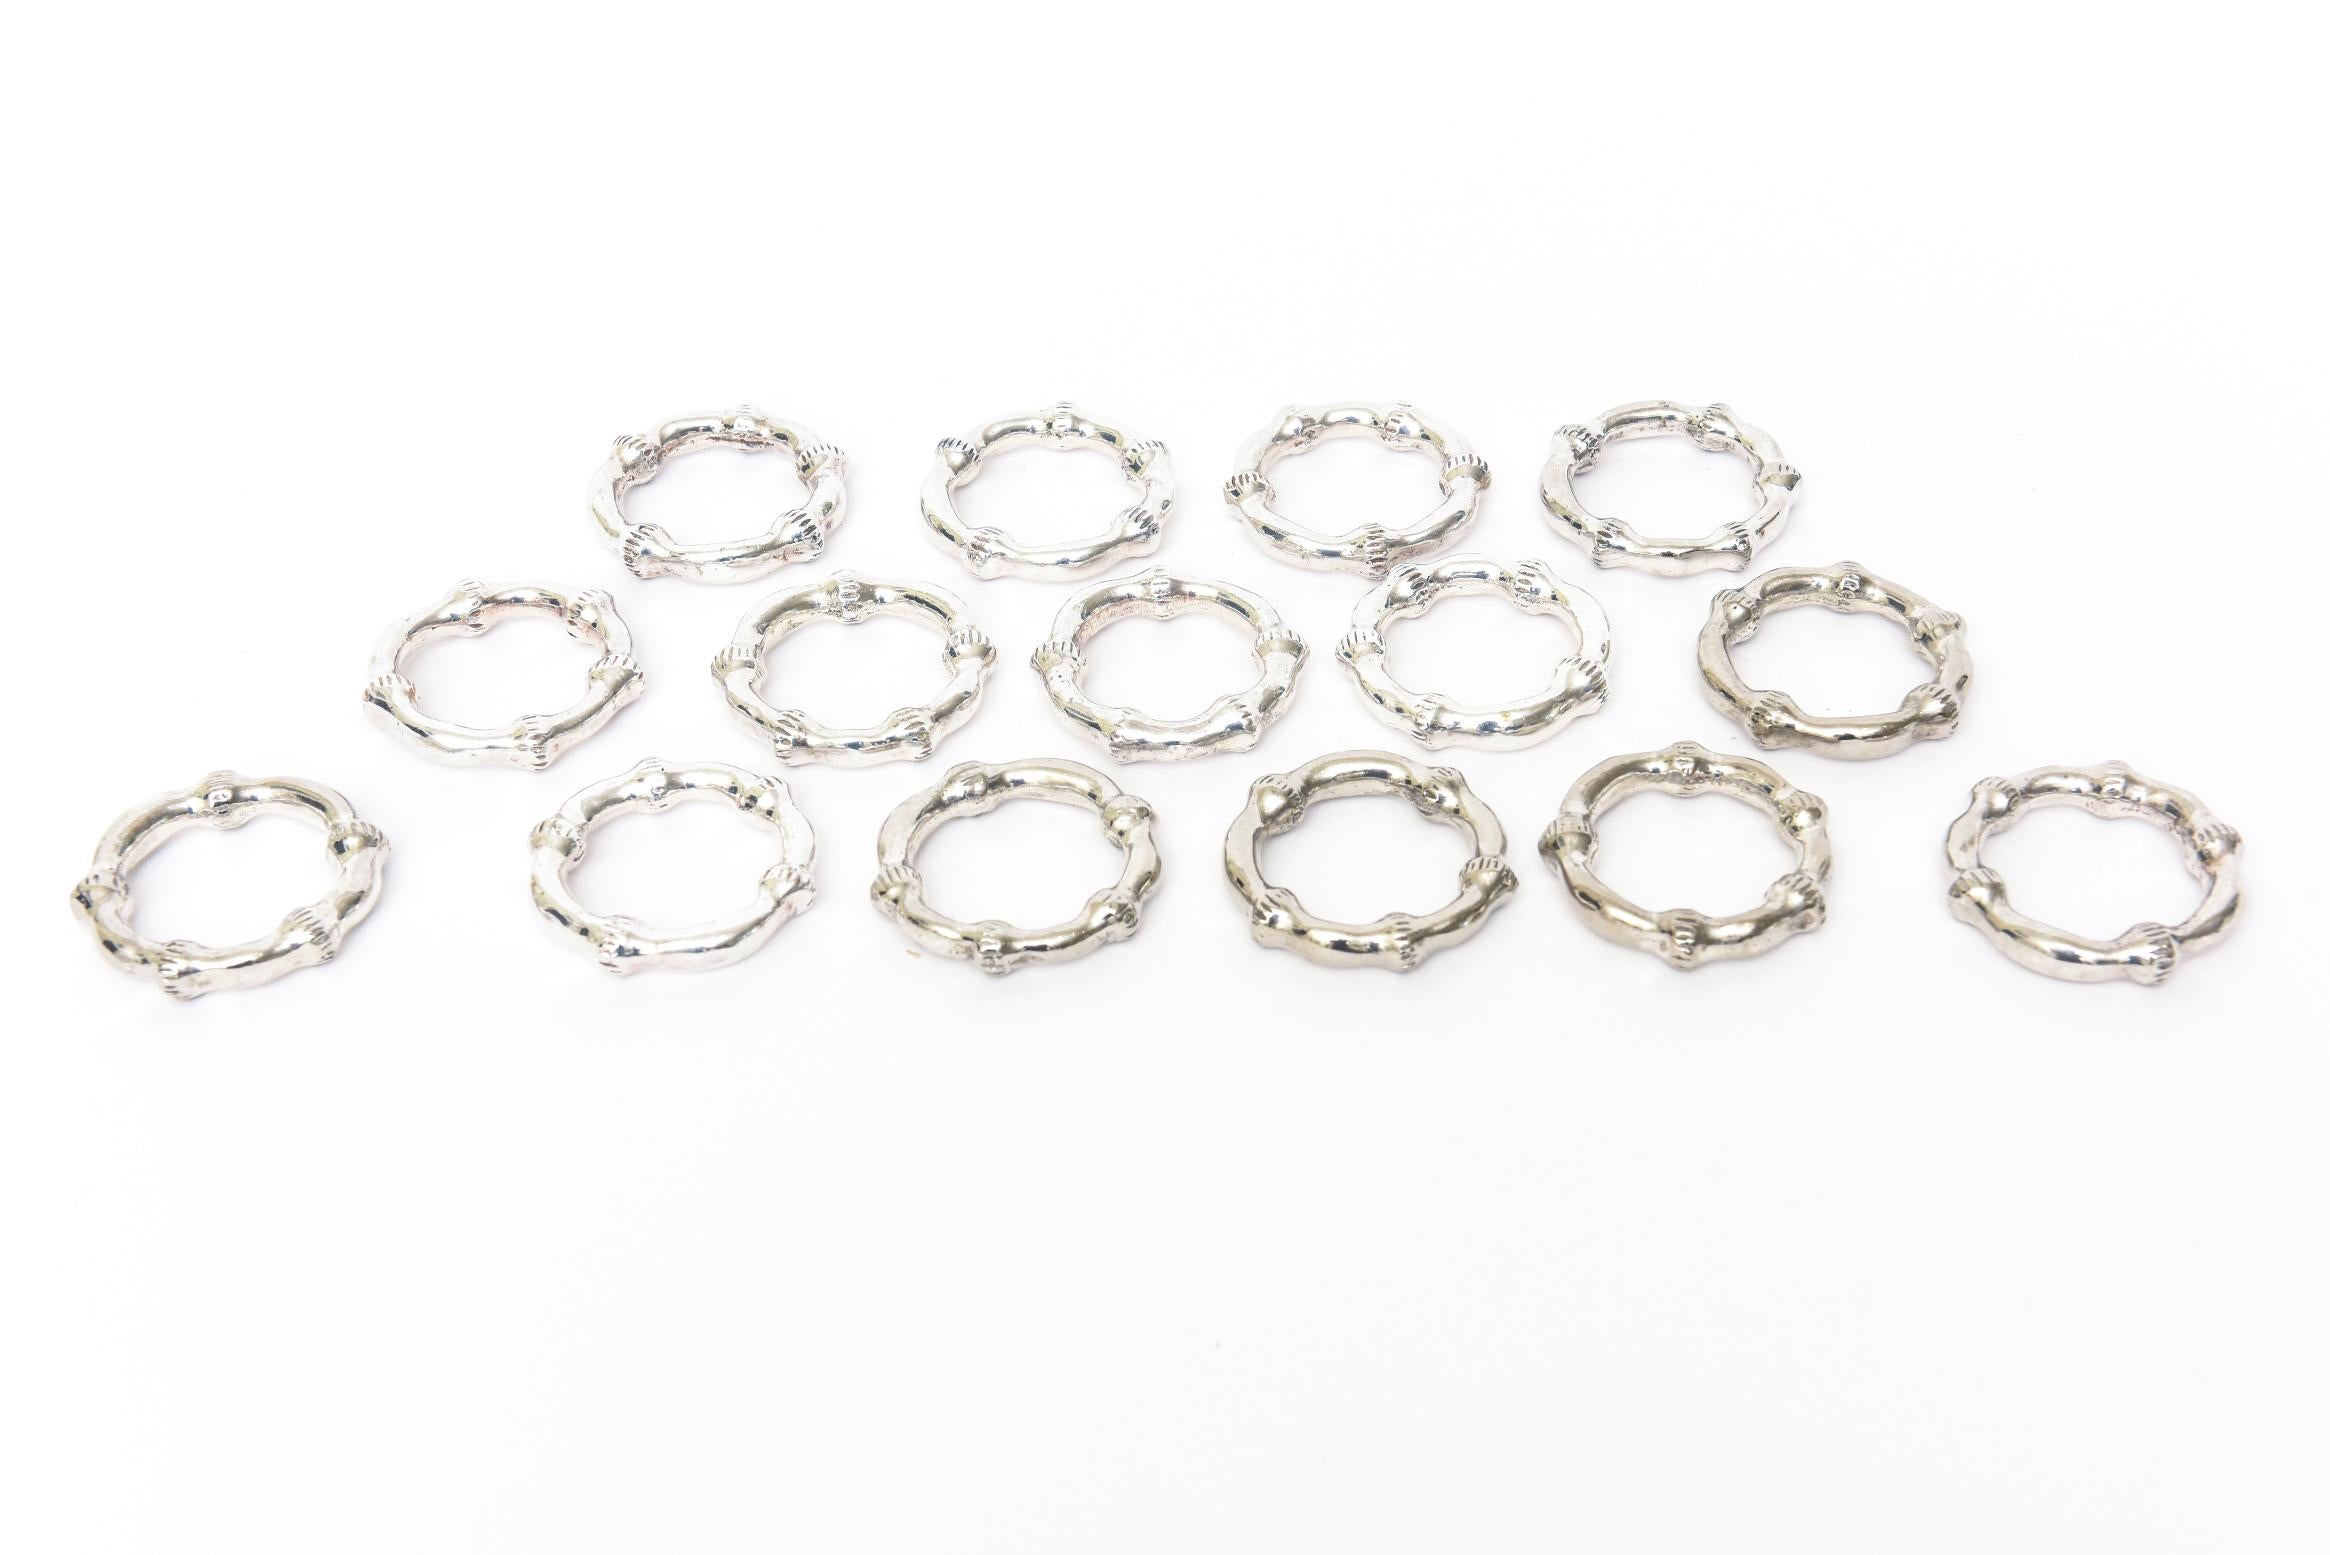 This set of 15 vintage napkin rings are of the bamboo design 10 of them are silver plate and the other 5 are nickel silver. We discovered that after we acquired them. They will not be noticeable of the difference in silver as you entertain. They all